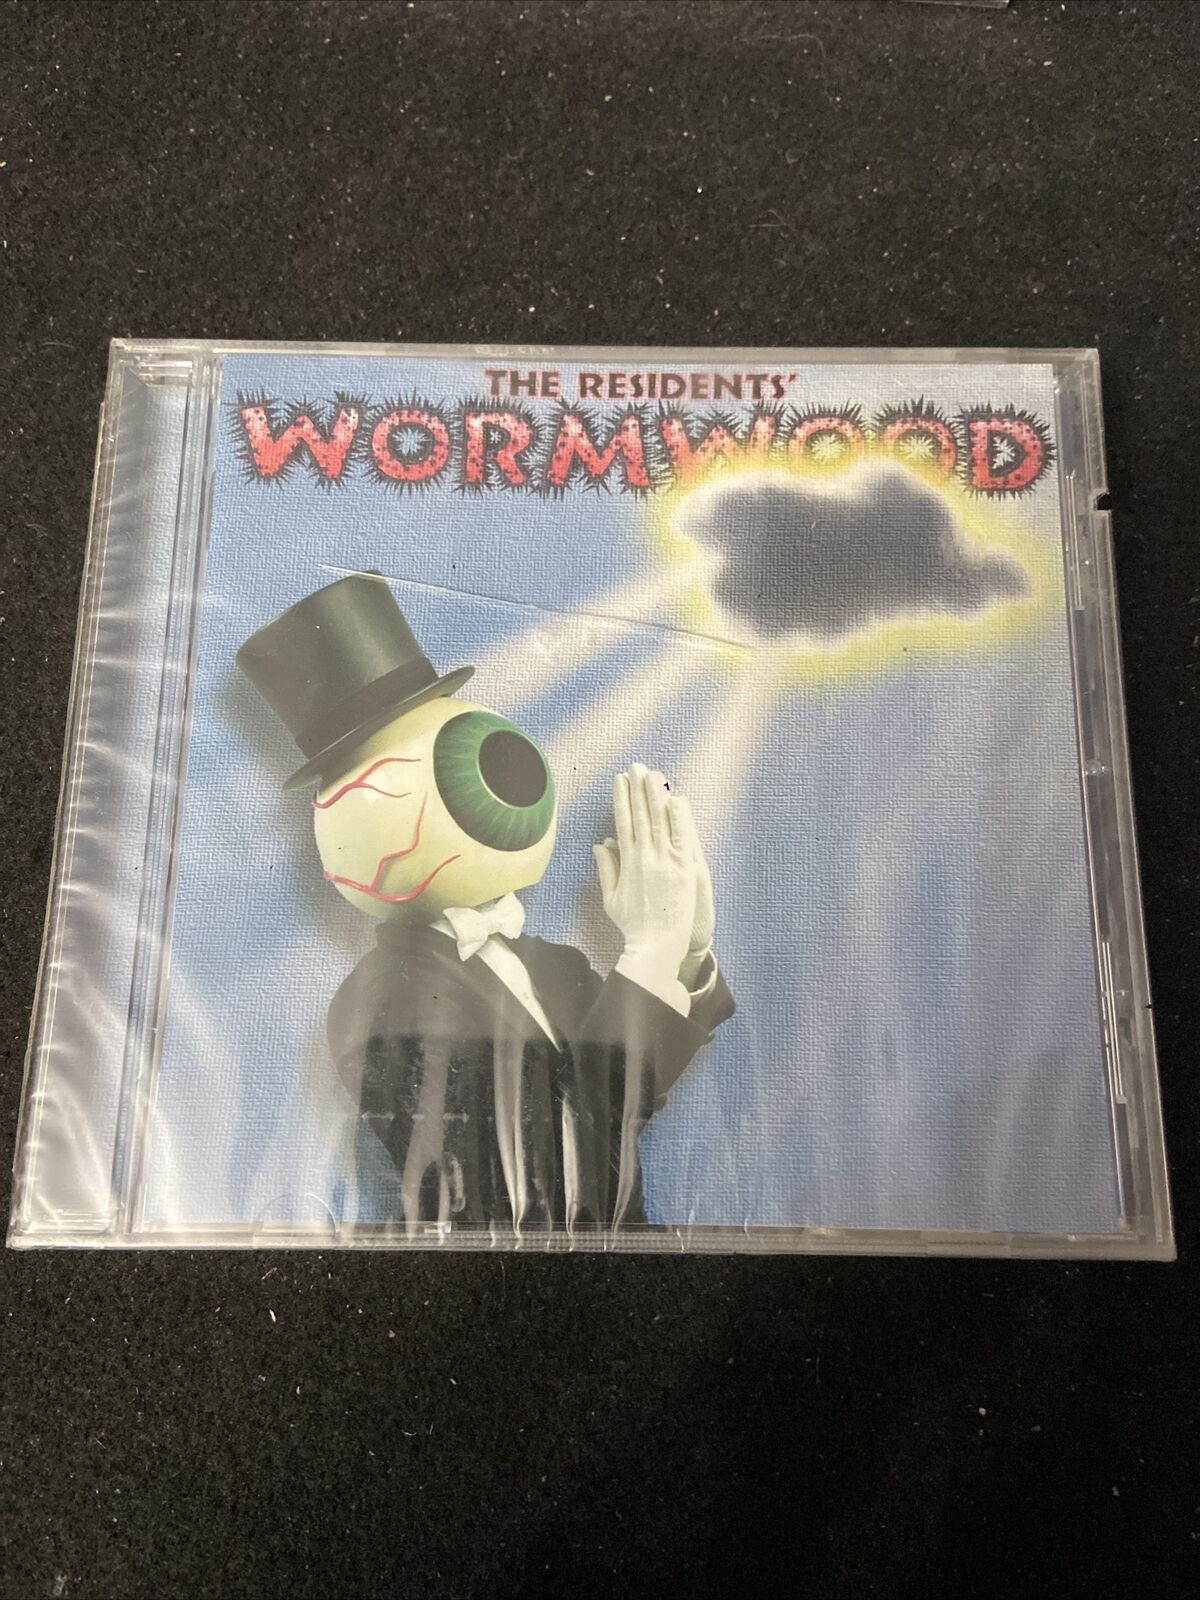 Wormwood by The Residents (CD, Oct-1998, East Side Digit) New, Factory Sealed